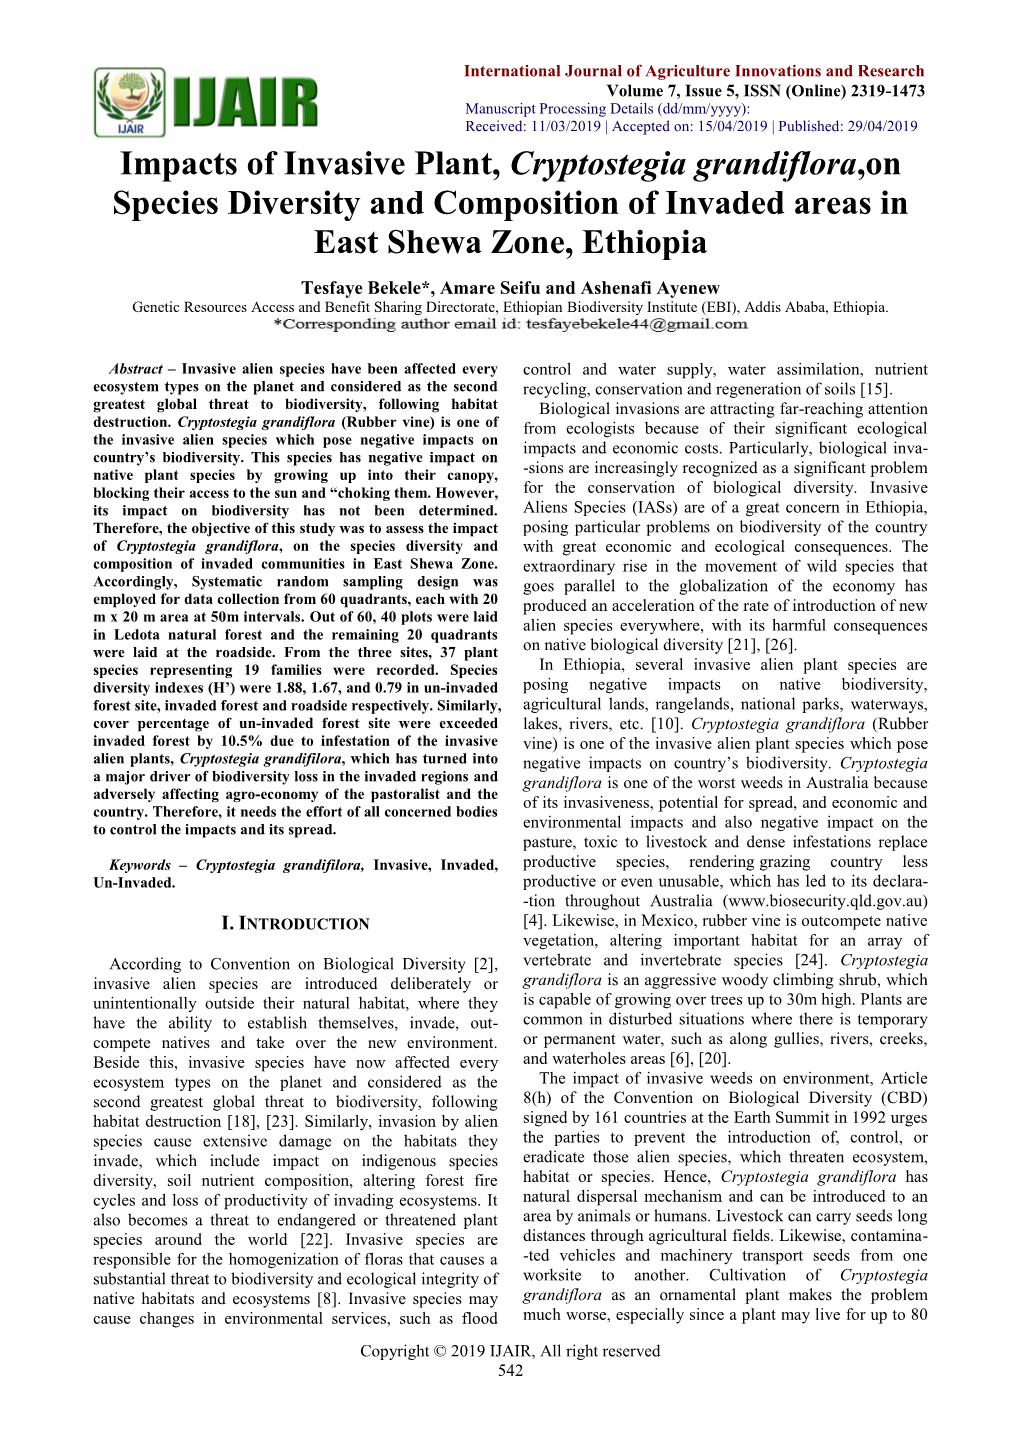 Impacts of Invasive Plant, Cryptostegia Grandiflora,On Species Diversity and Composition of Invaded Areas in East Shewa Zone, Ethiopia